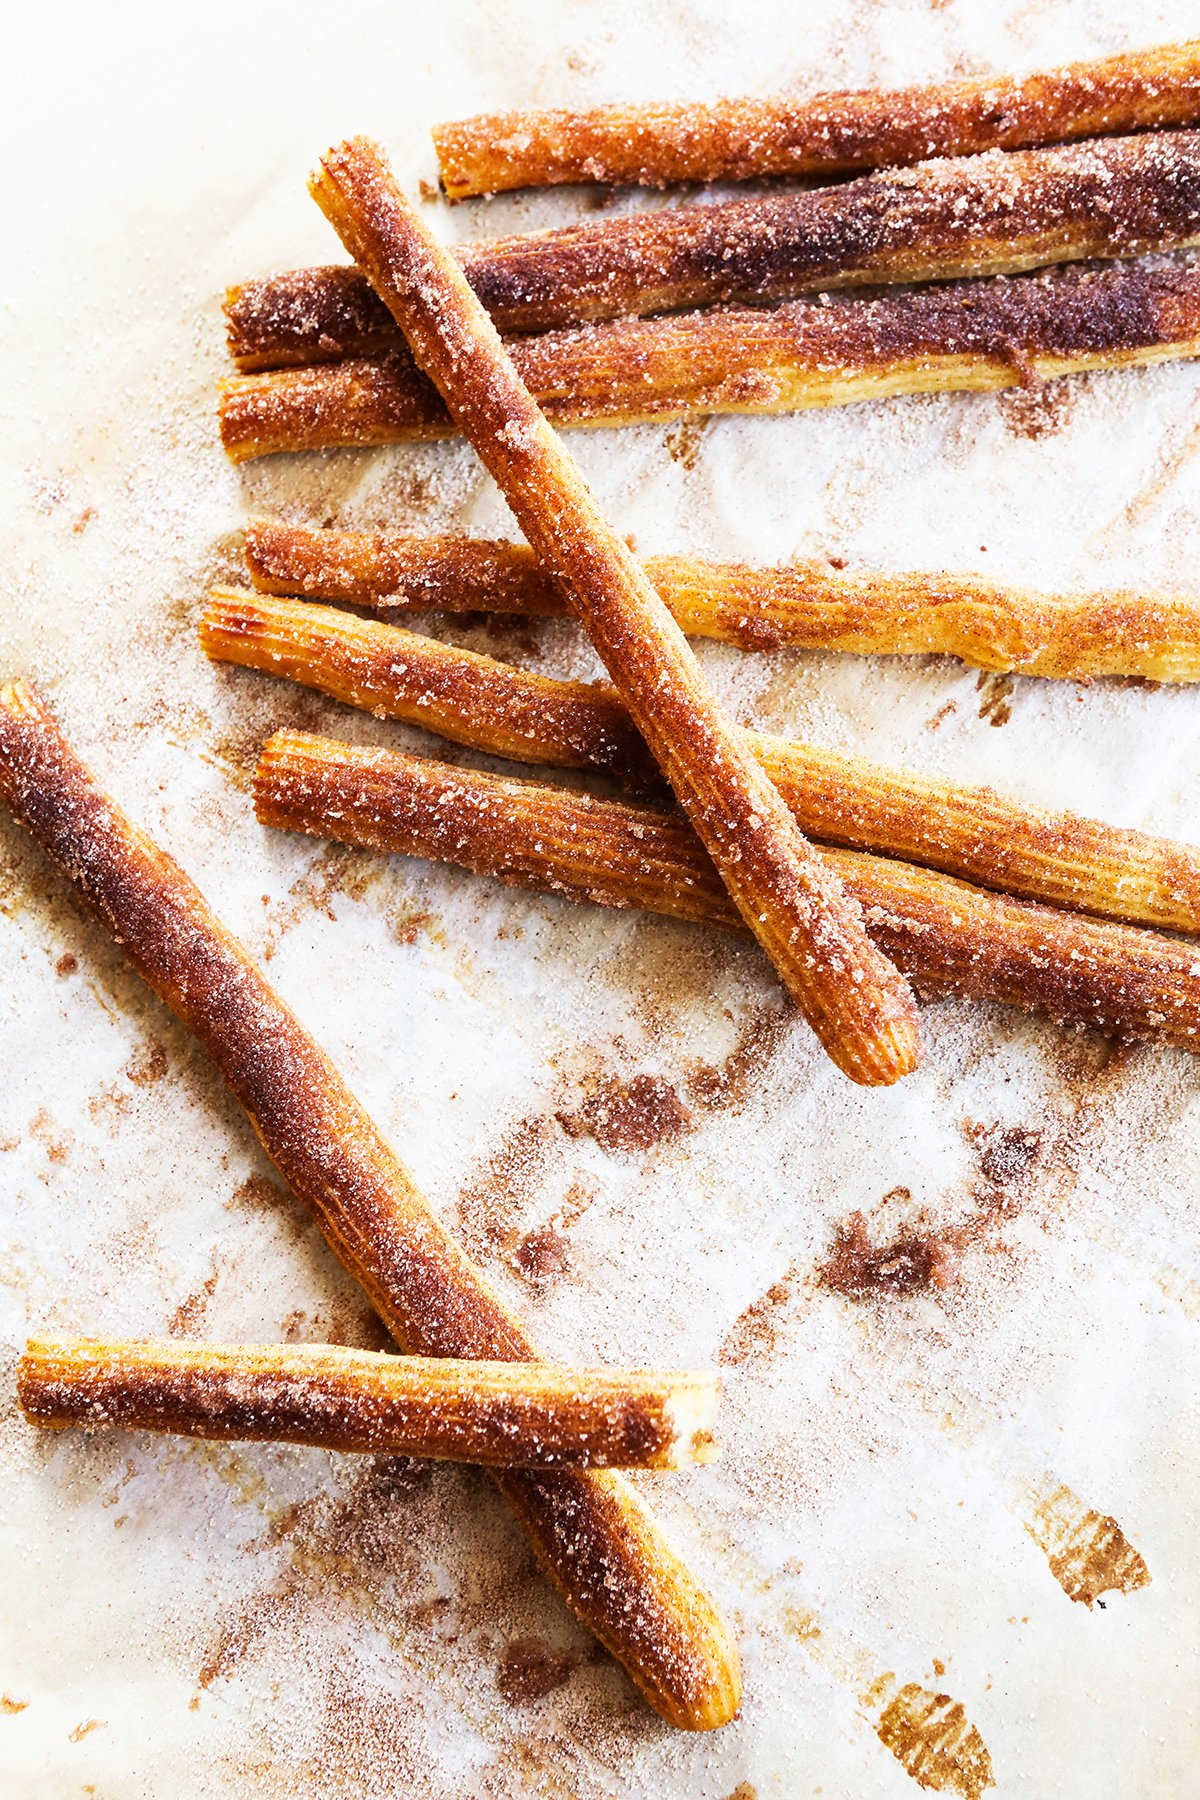 Baked churros covered in cinnamon and sugar and stacked on parchment paper.